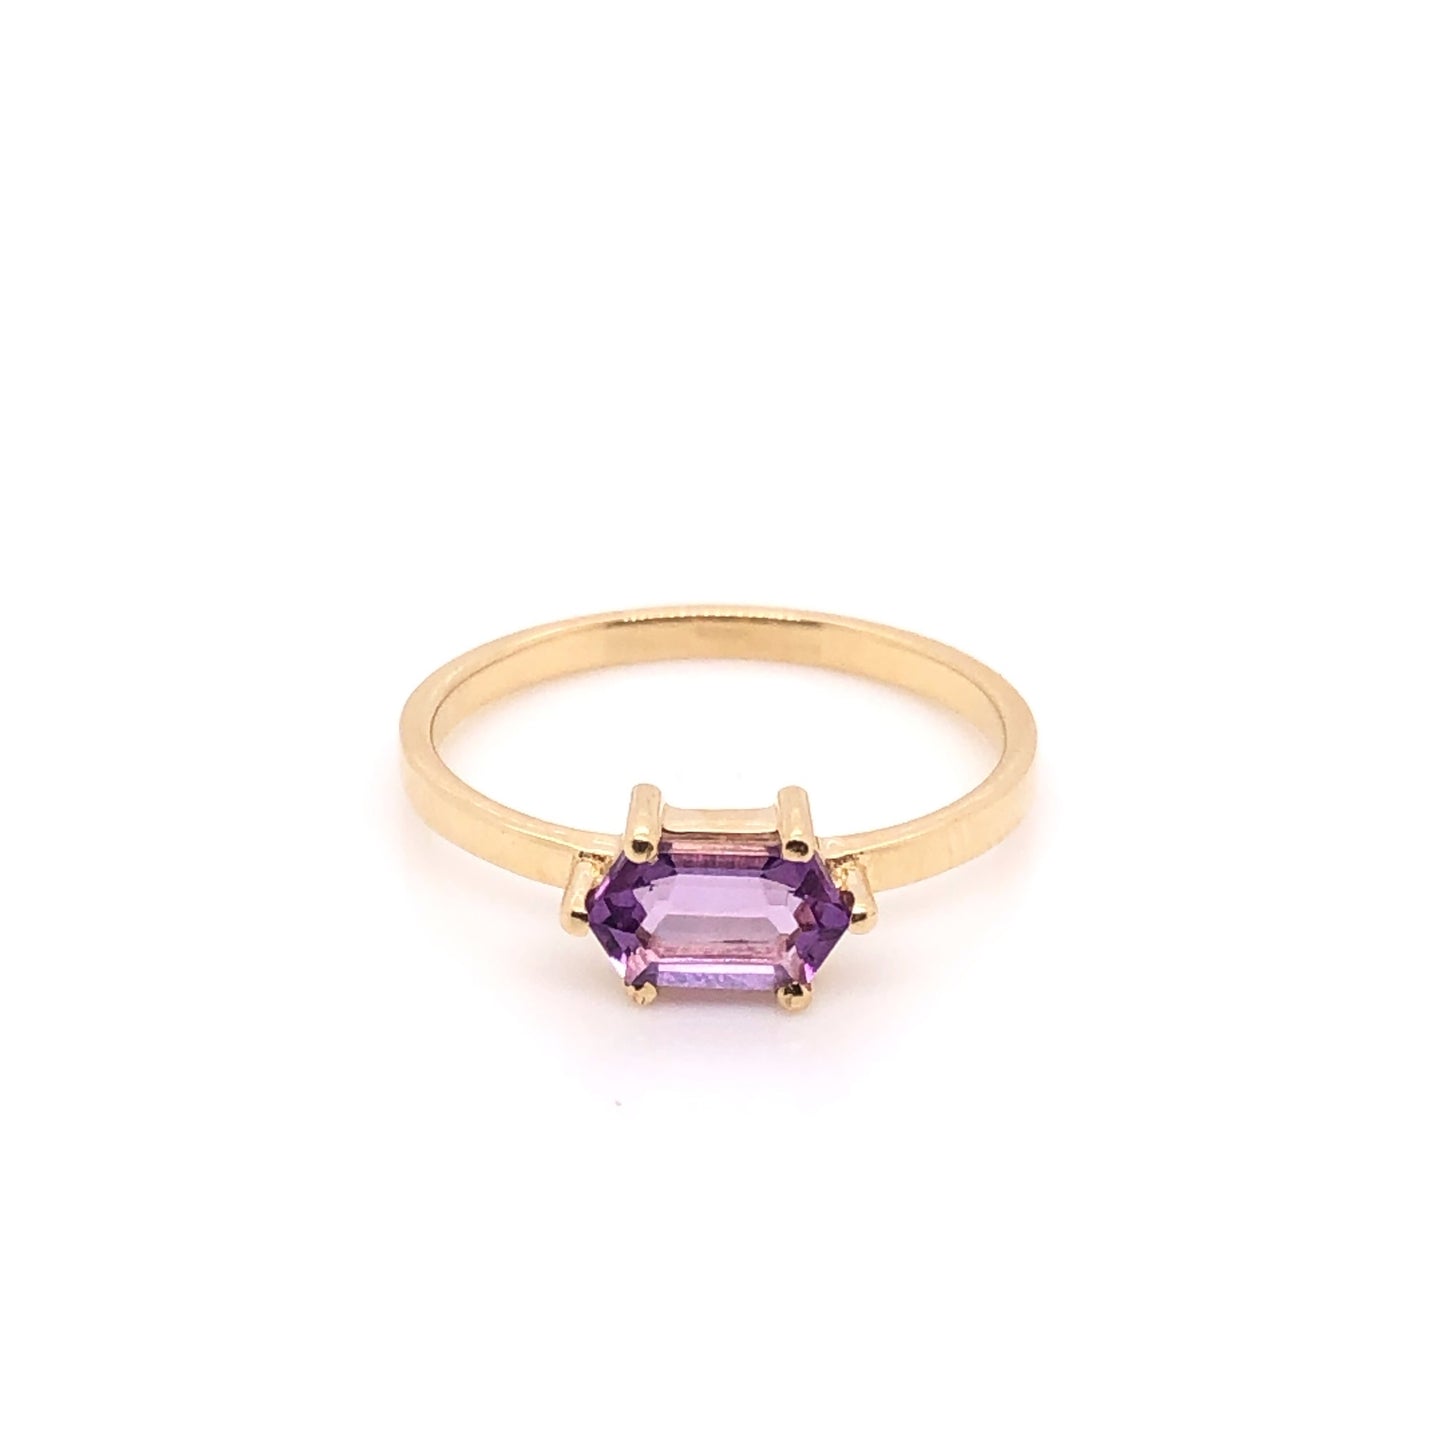 IMMEDIATE DELIVERY / Hexagonal Amethyst Ring / 14k Yellow Gold / Size 5